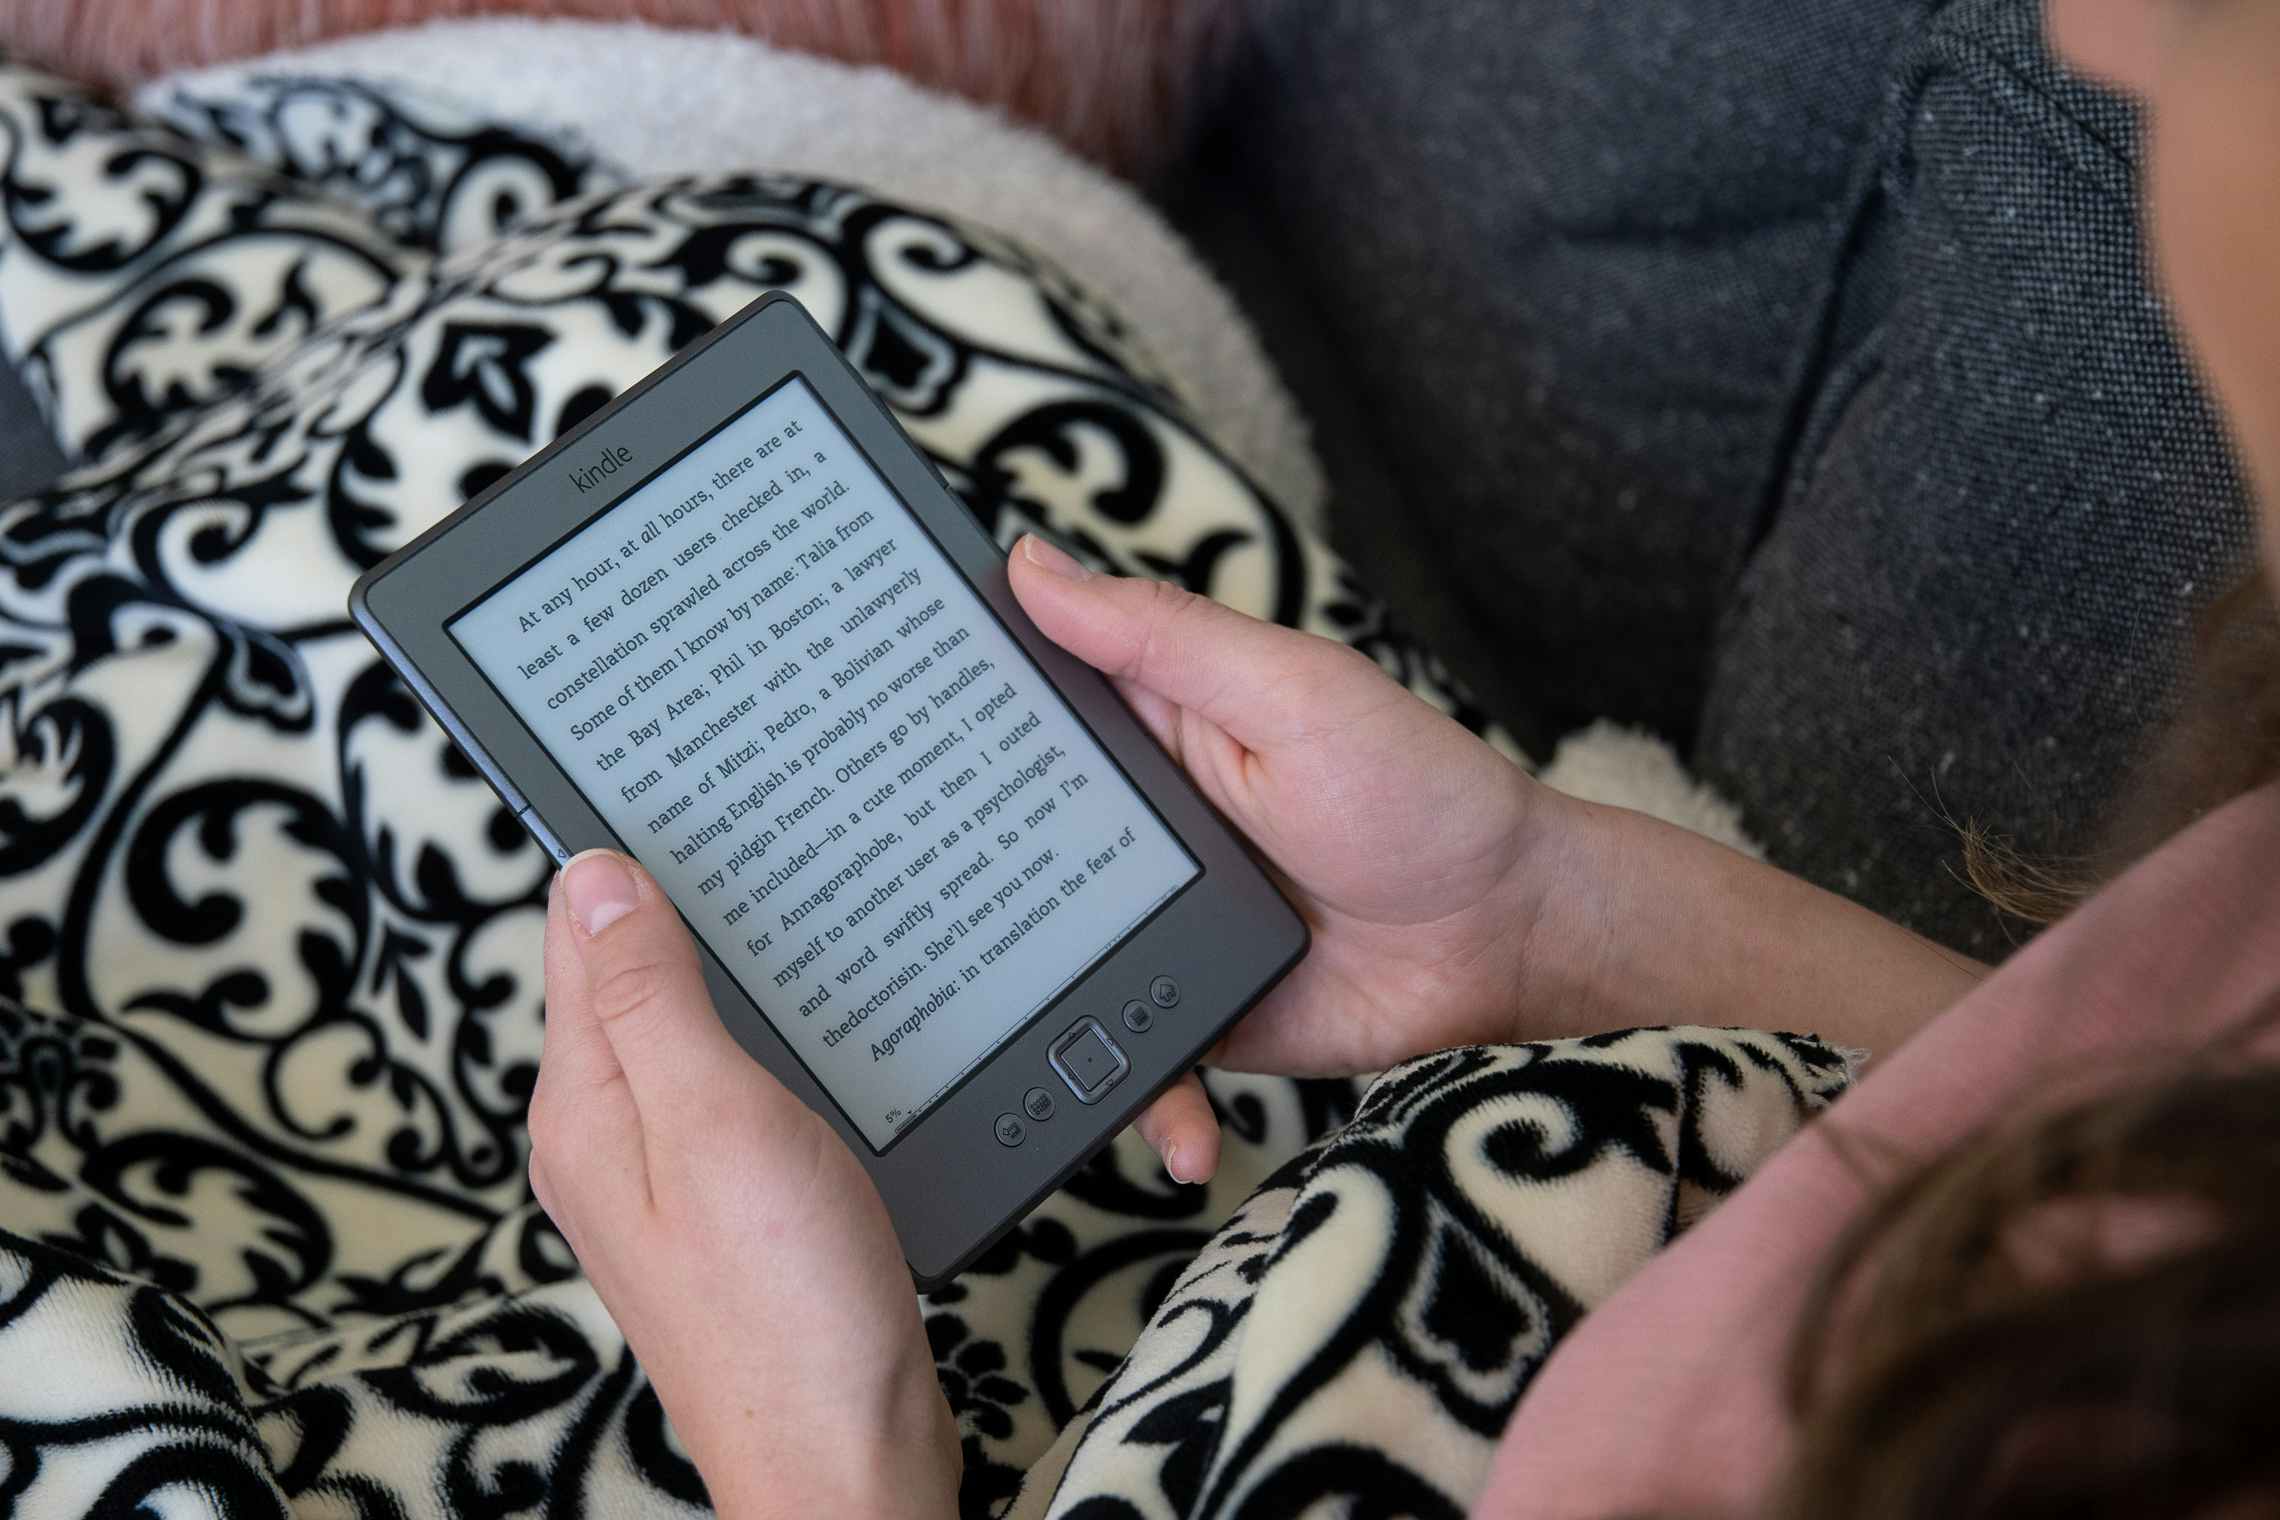 A woman holding an Amazon Kindle with a book displayed on the screen.